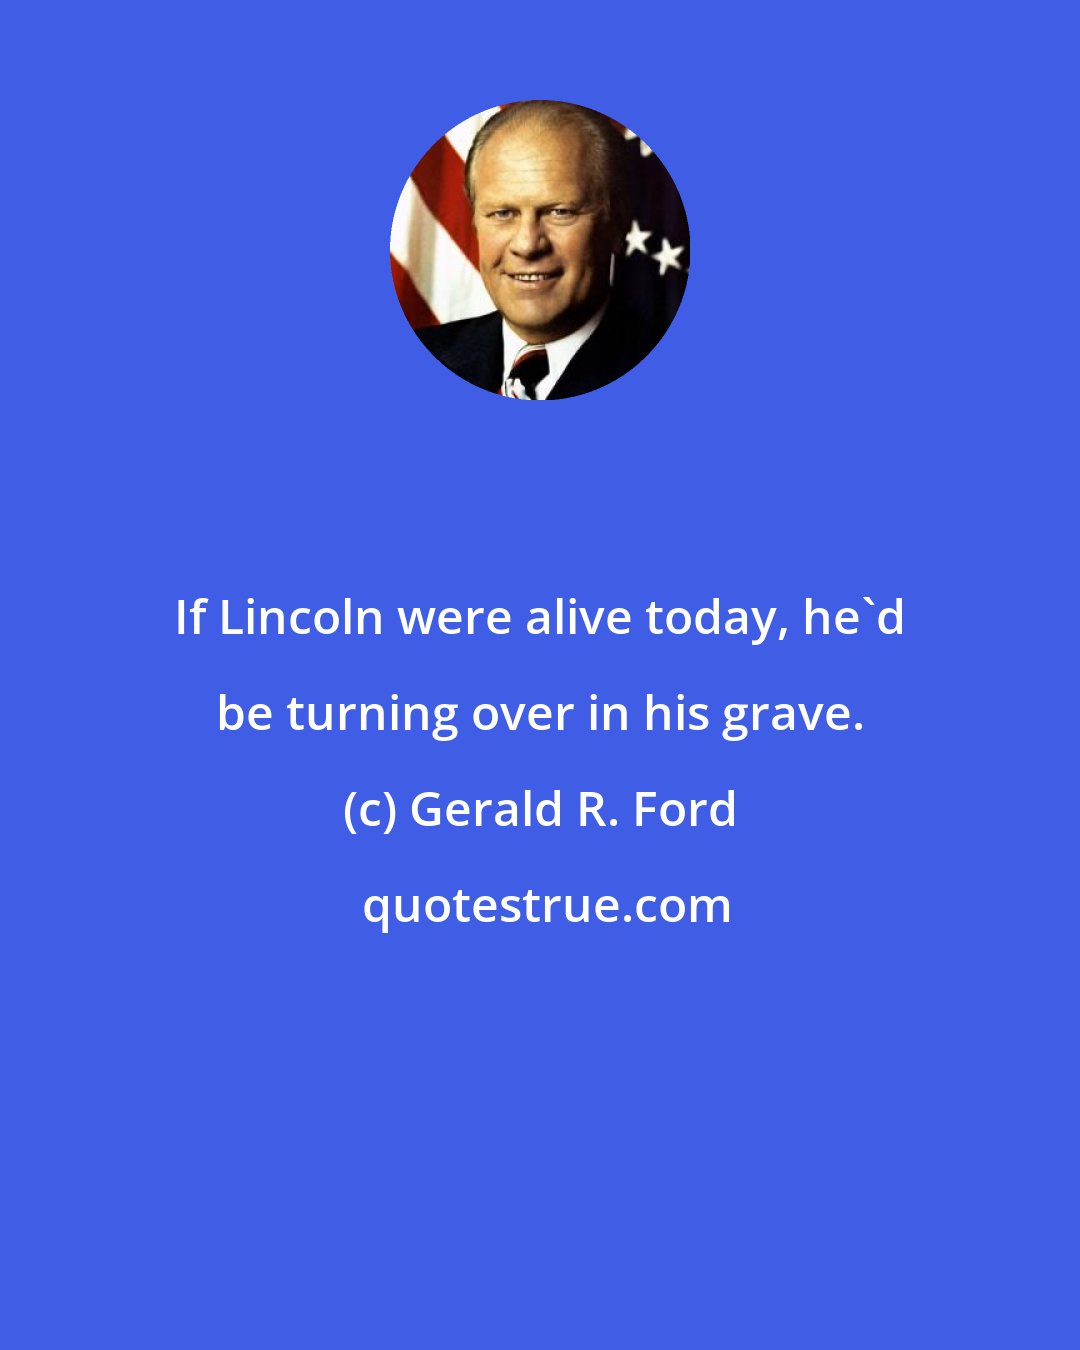 Gerald R. Ford: If Lincoln were alive today, he'd be turning over in his grave.